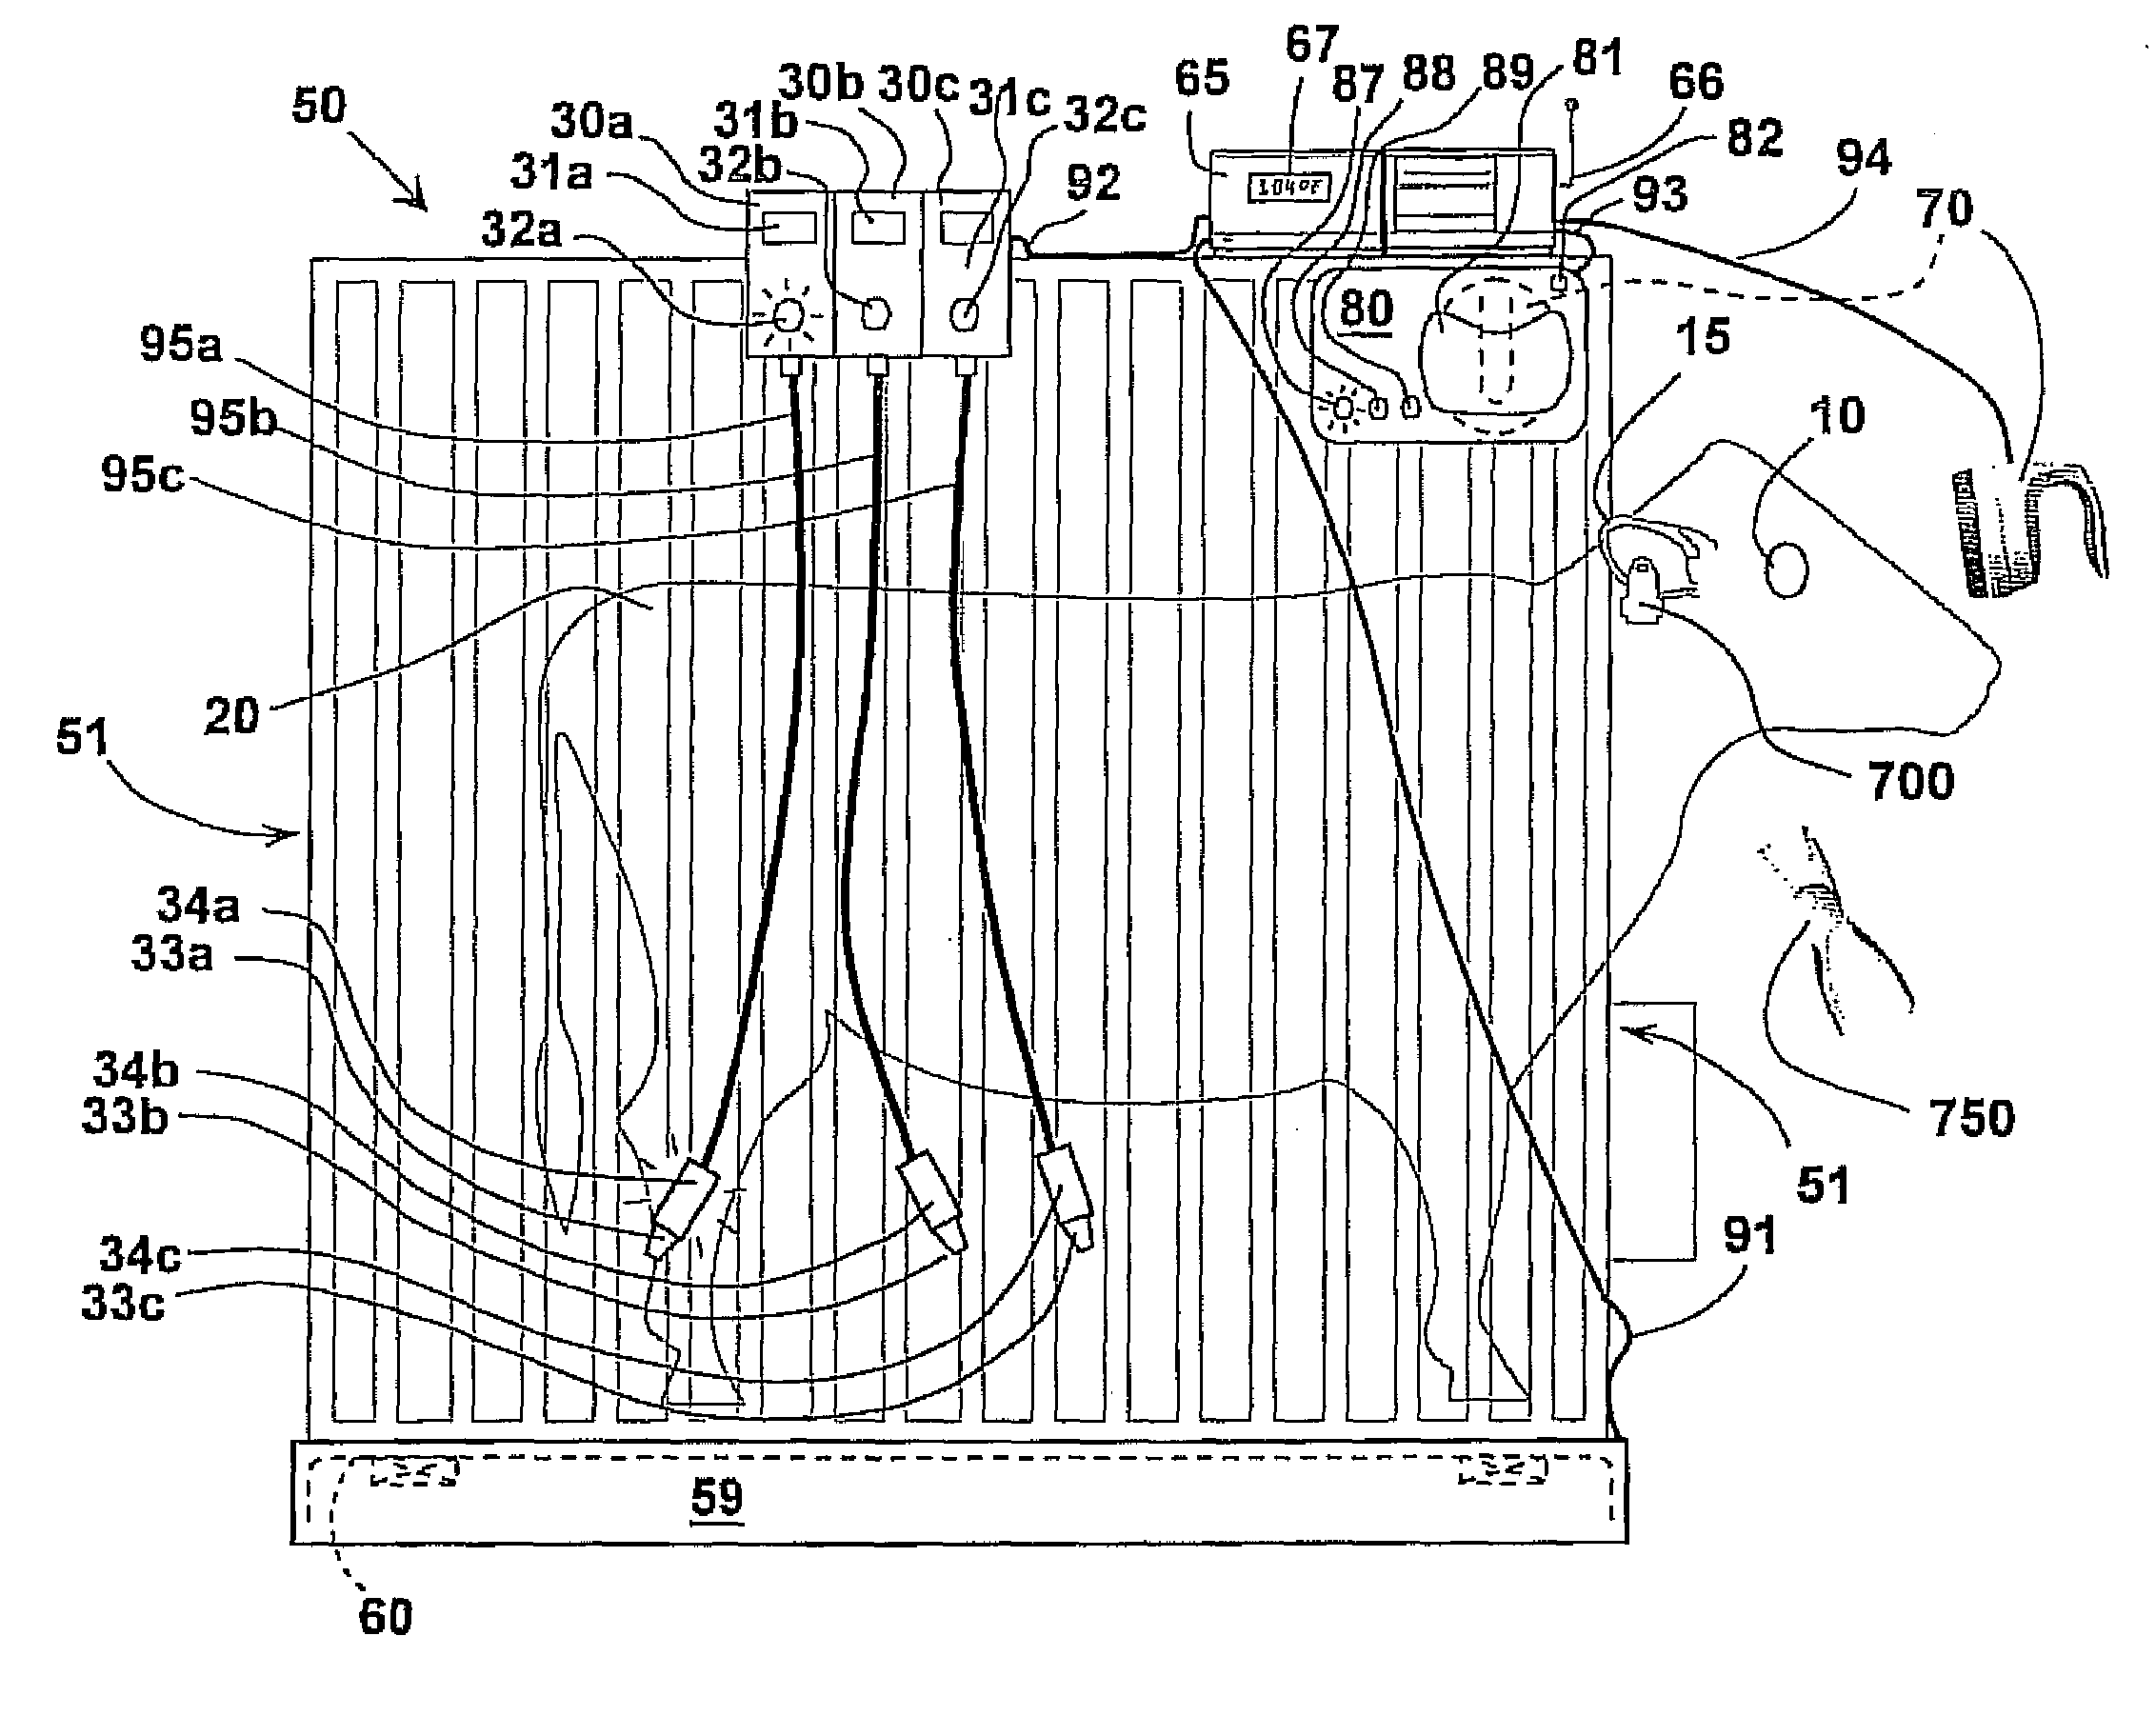 Core-Temperature Based Herd Management System and Method